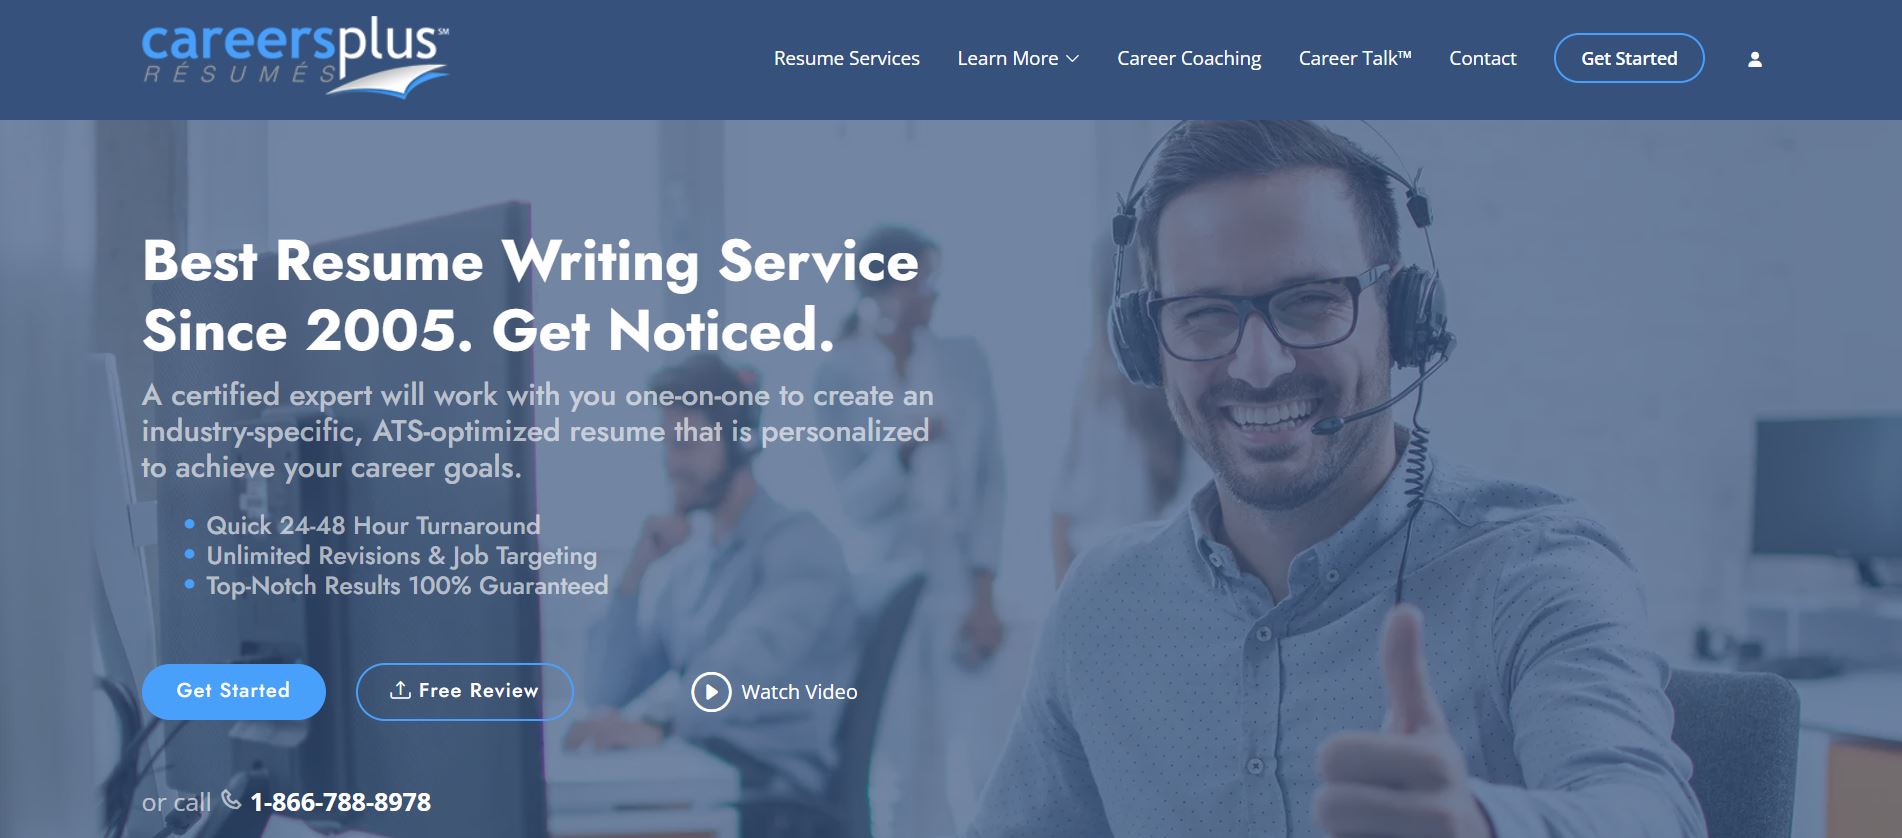 careerplus for executive resume writing services